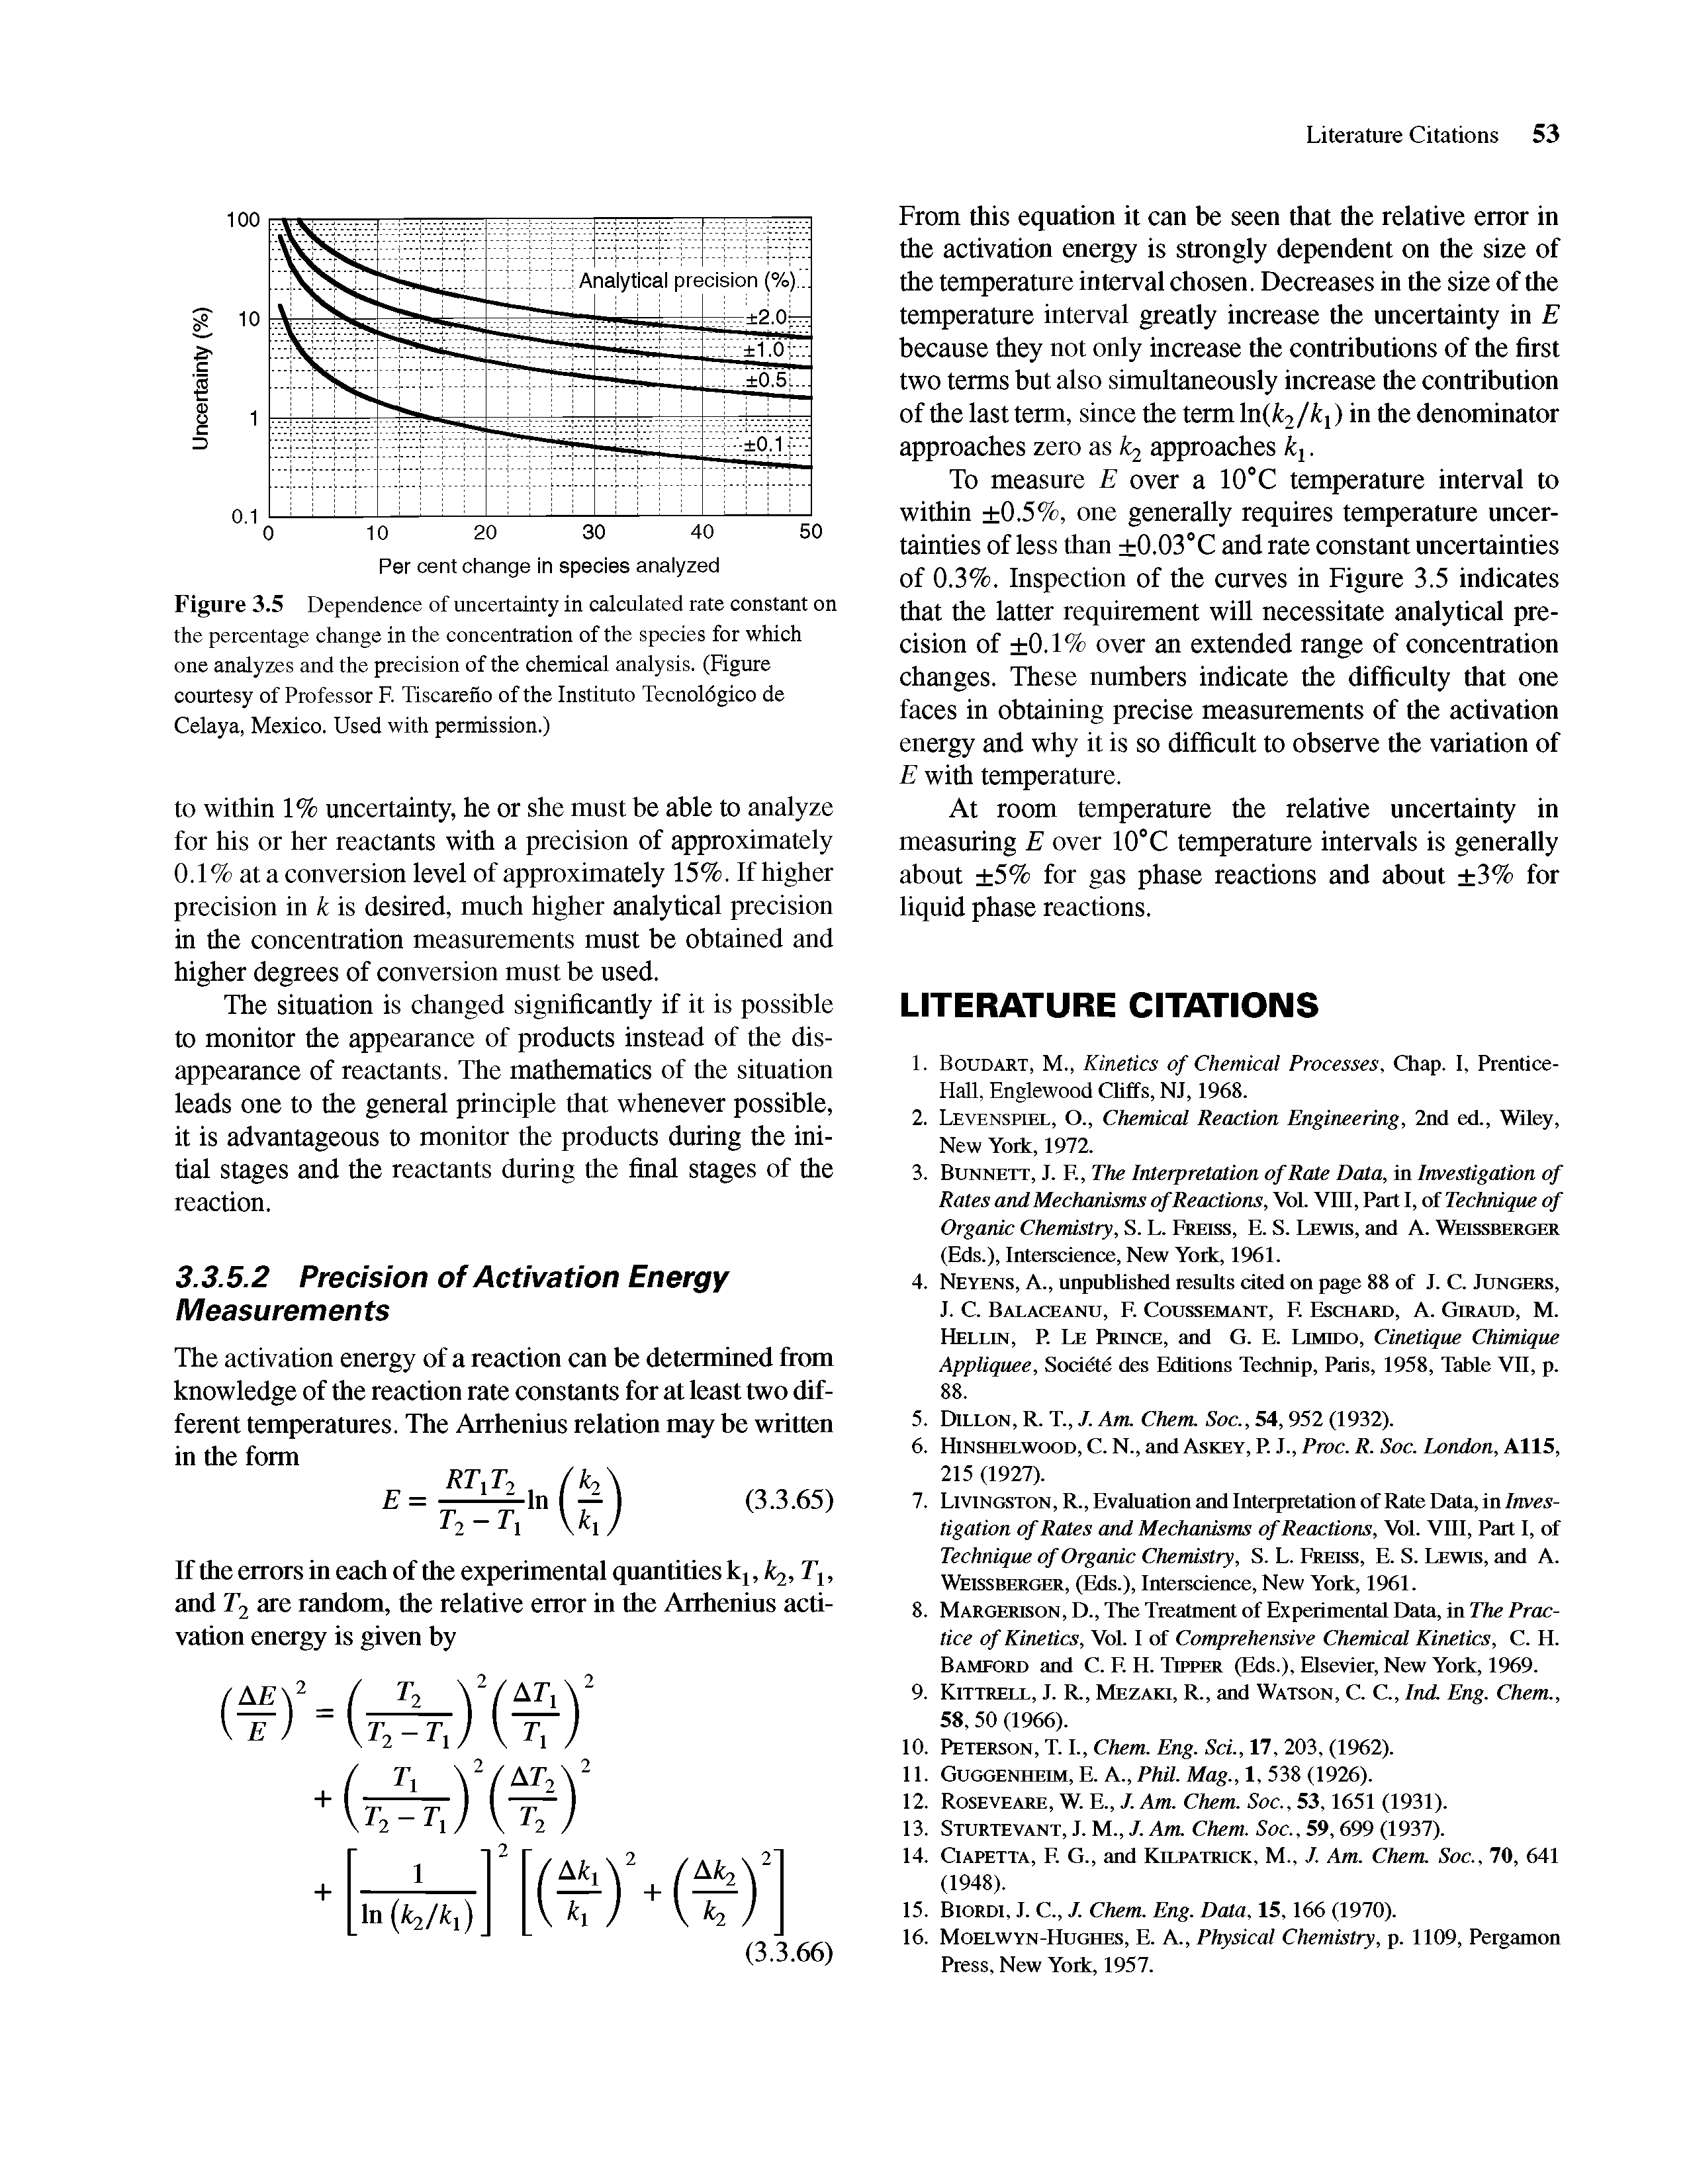 Figure 3.5 Dependence of uncertainty in calculated rate constant on the percentage change in the concentration of the species for which one analyzes and the precision of the chemical analysis. (Figure courtesy of Professor F. Tiscareno of the Institute Tecnoldgico de Celaya, Mexico. Used with permission.)...